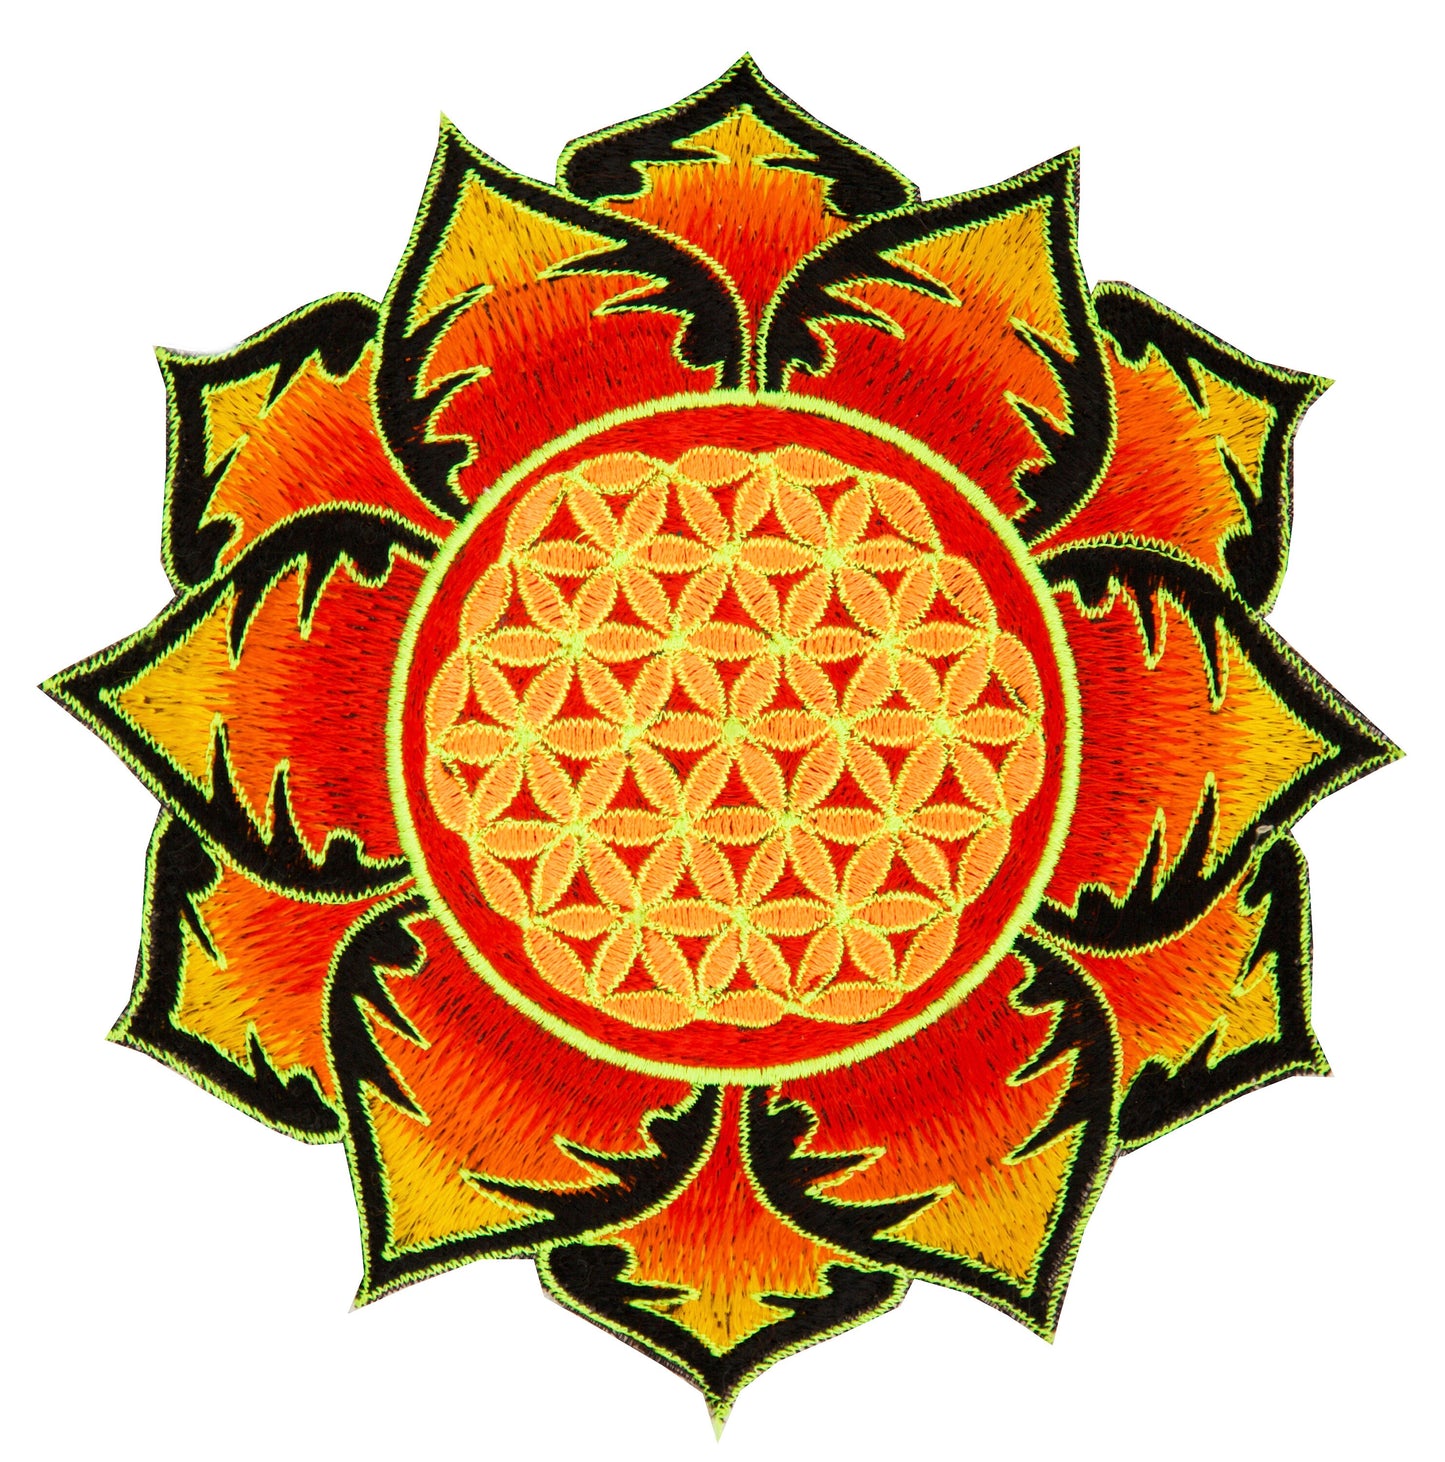 Sunshine Flower of Life patch for sew on - holy geometry embroidery blacklight glowing art